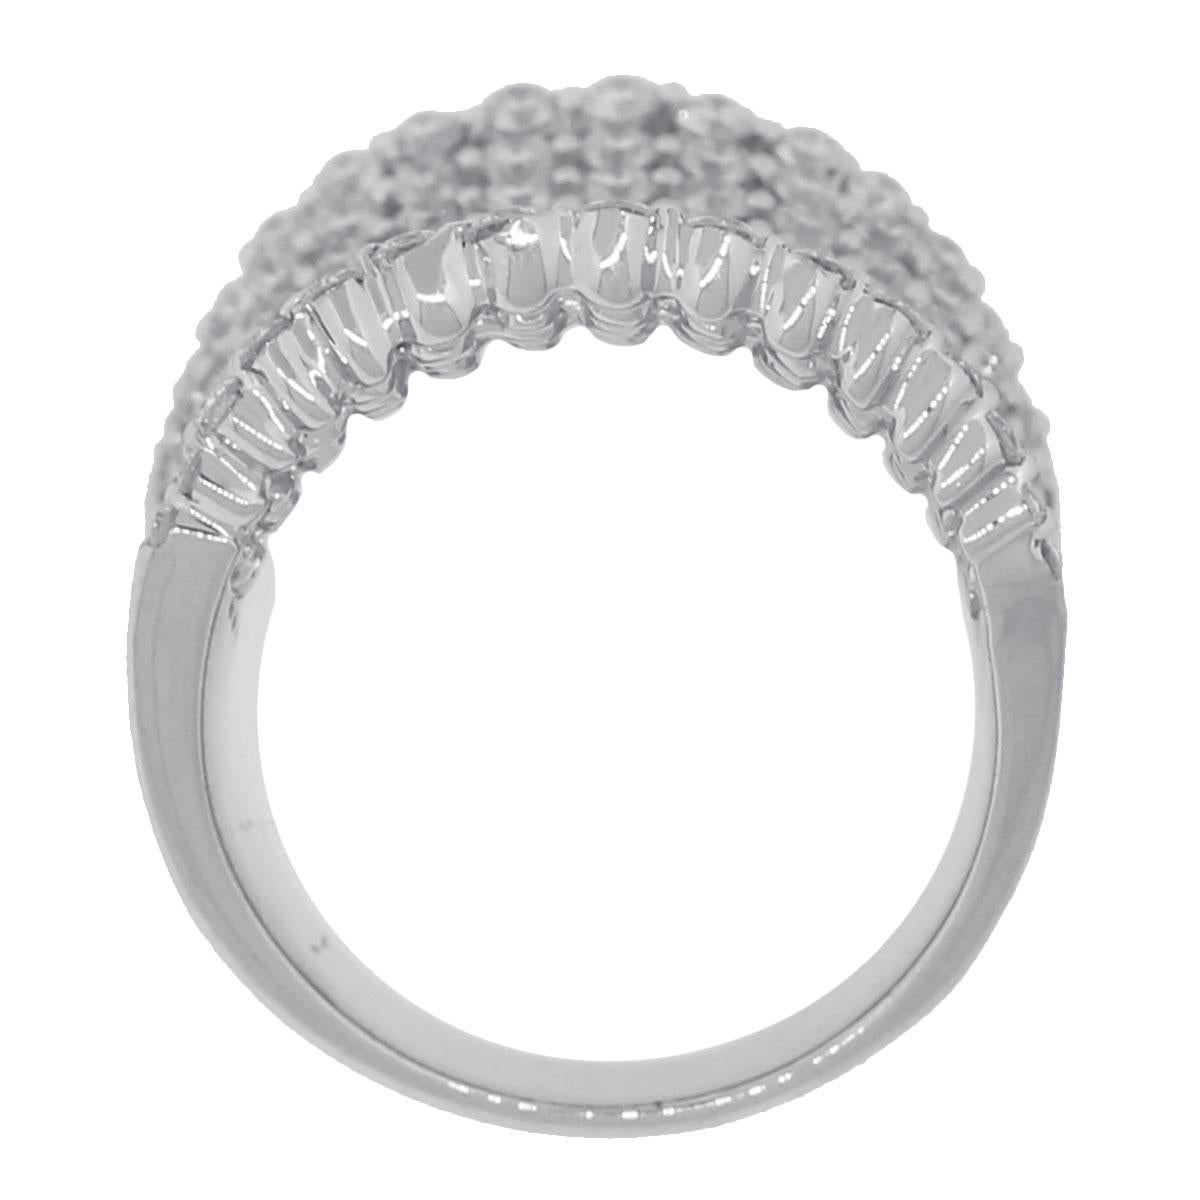 Material: 18k white gold
Diamonds Details: Approximately 3.87ctw of round brilliant diamonds. Diamonds are G/H in color and VS in clarity.
Ring Measurements: 0.91″ x 0.98″ x 0.84″
Size: 6.75
Weight: 14.17g
SKU: A30312209